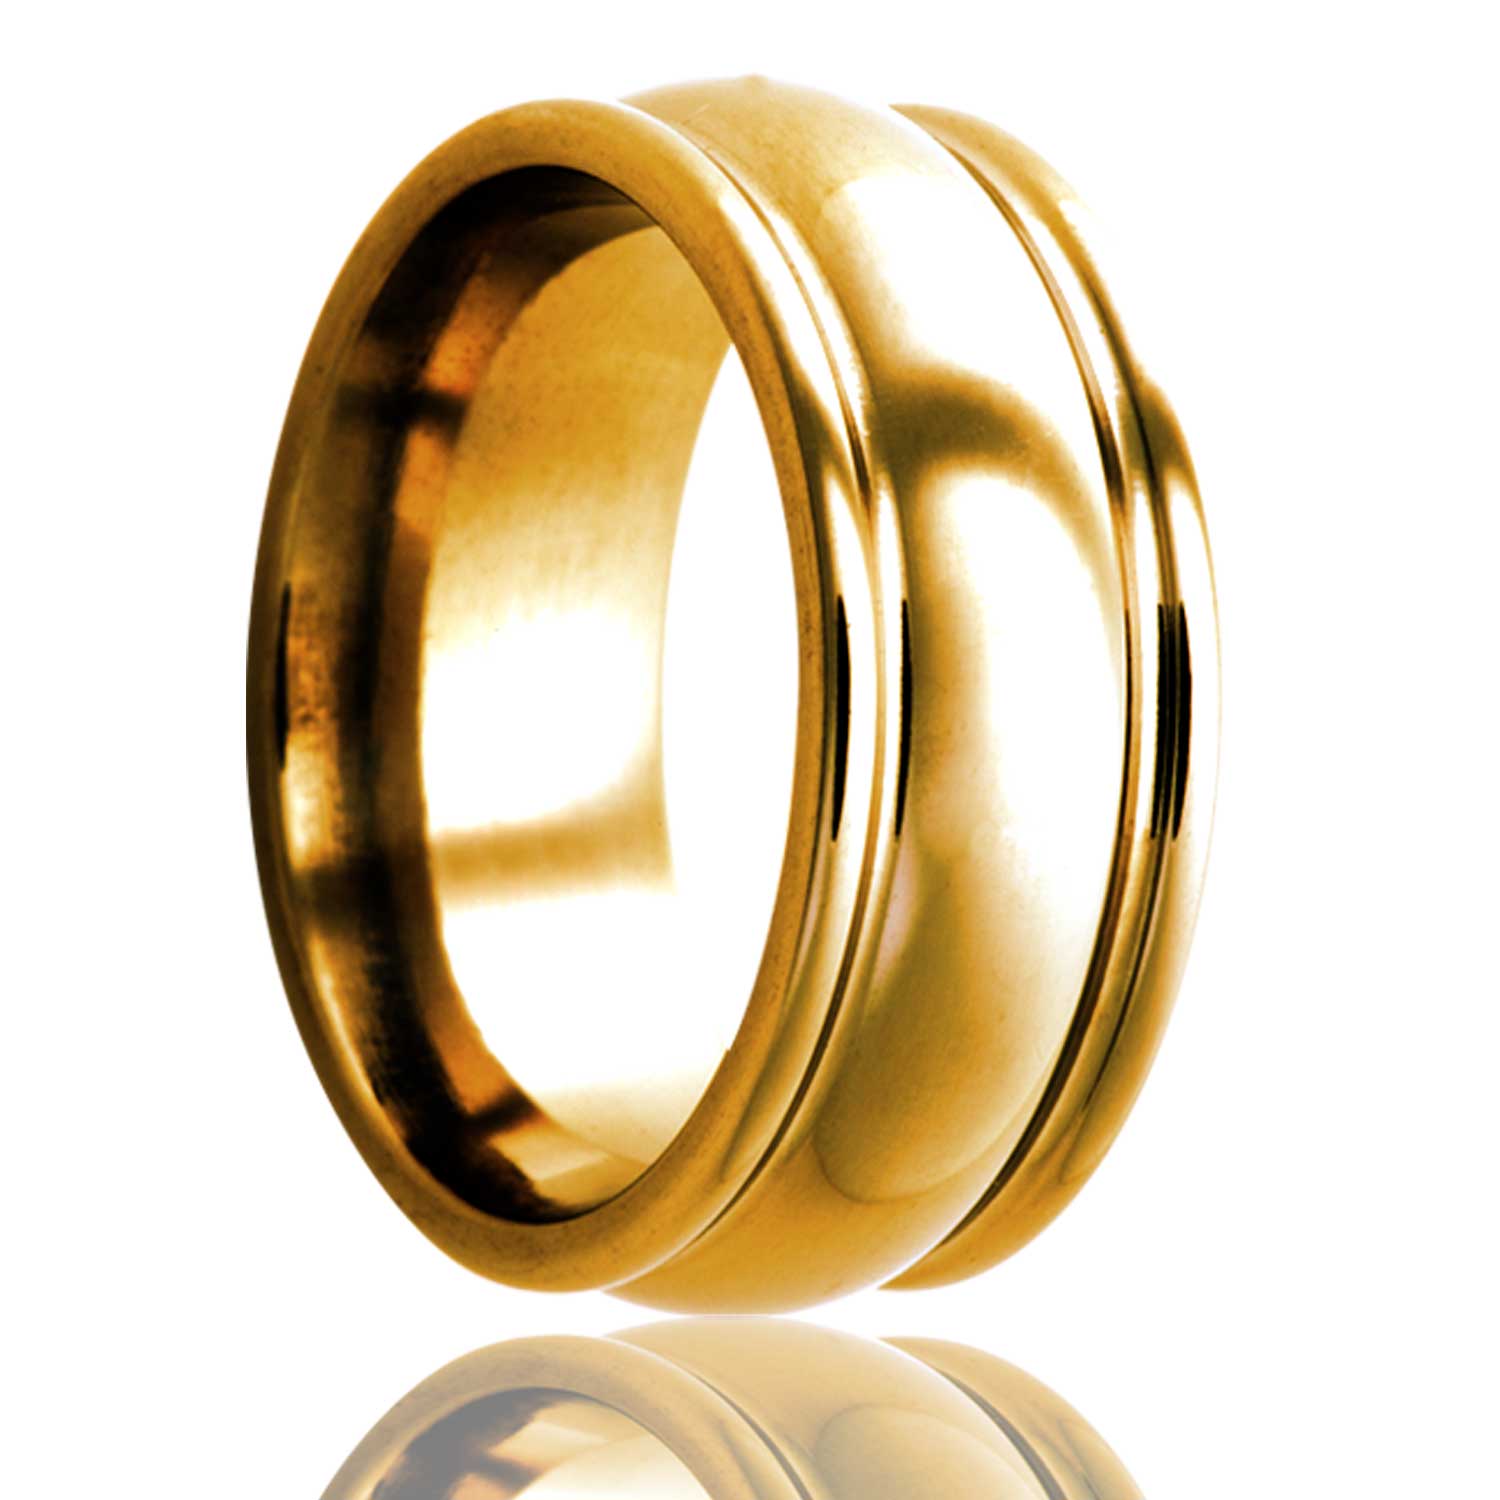 A 14k gold domed wedding band with dual grooved edges displayed on a neutral white background.